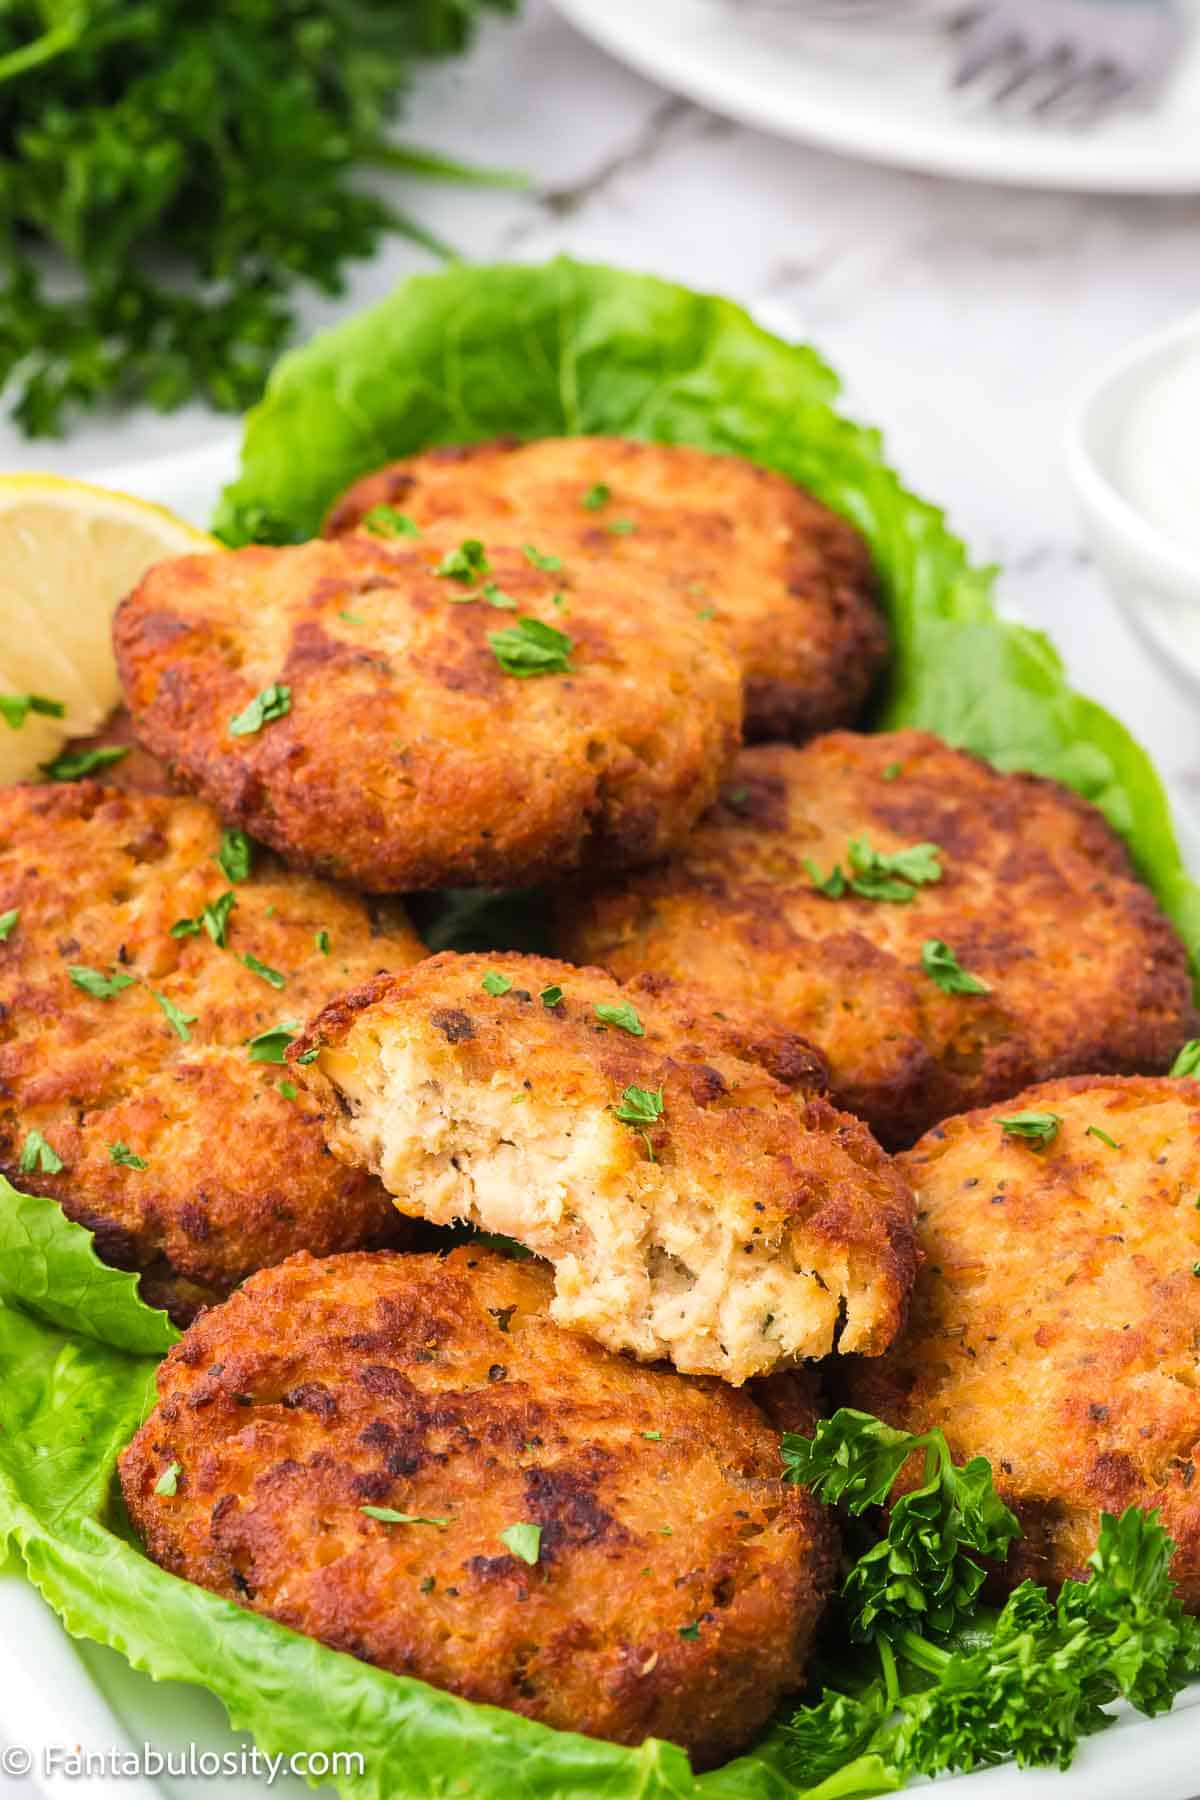 Salmon patties on plate lined with green lettuce leaves, with one patties cut open to see the inside.